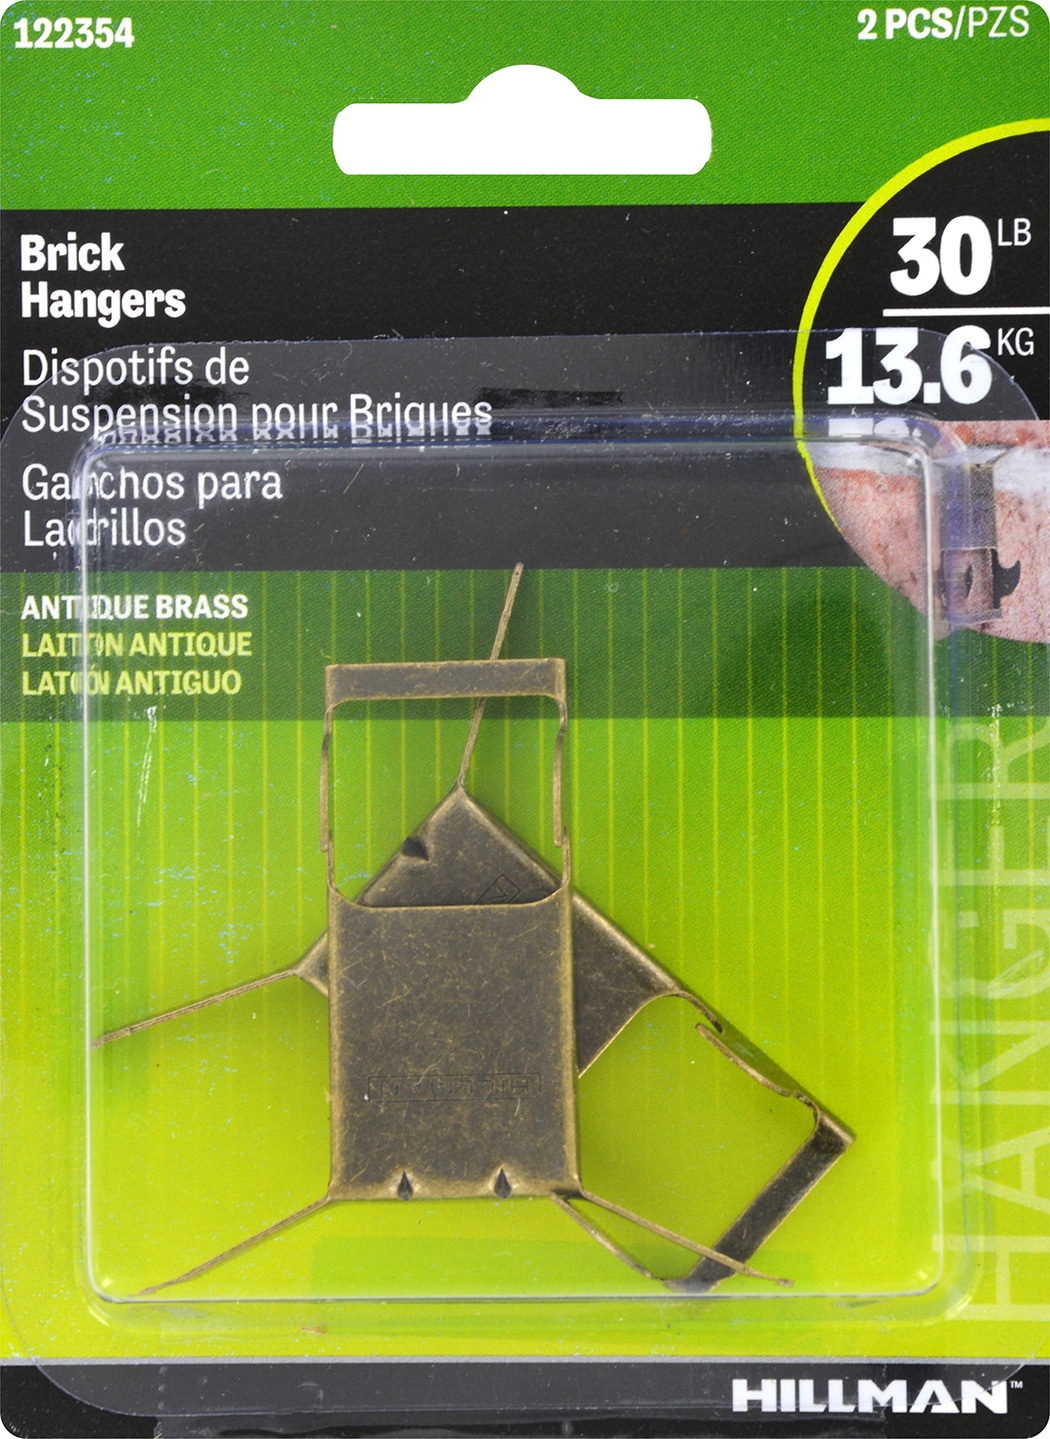 Booda Brand Brick Hook Clips (4 Pack) for Hanging Outdoors, Brick Hangers  Fits Standard Size Brick